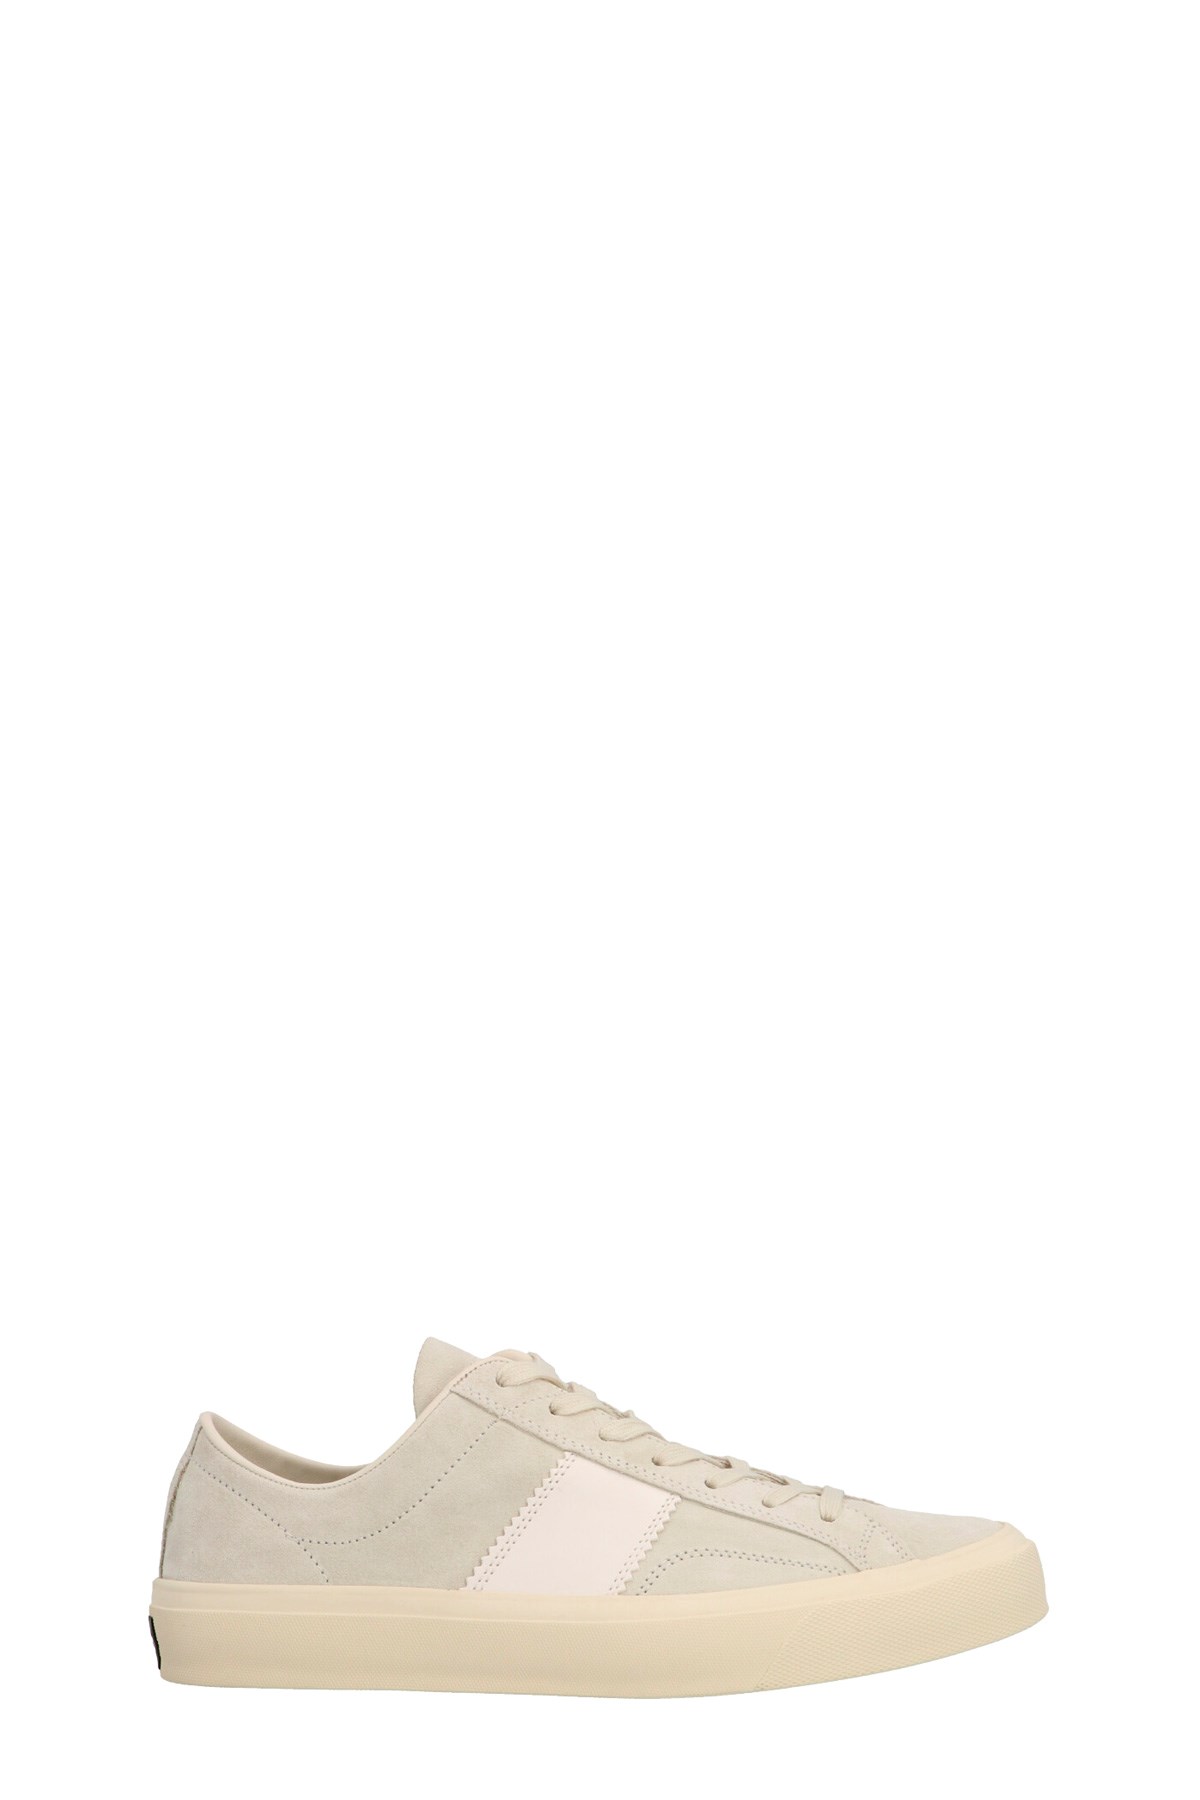 TOM FORD ‘Cambridge’ Sneakers